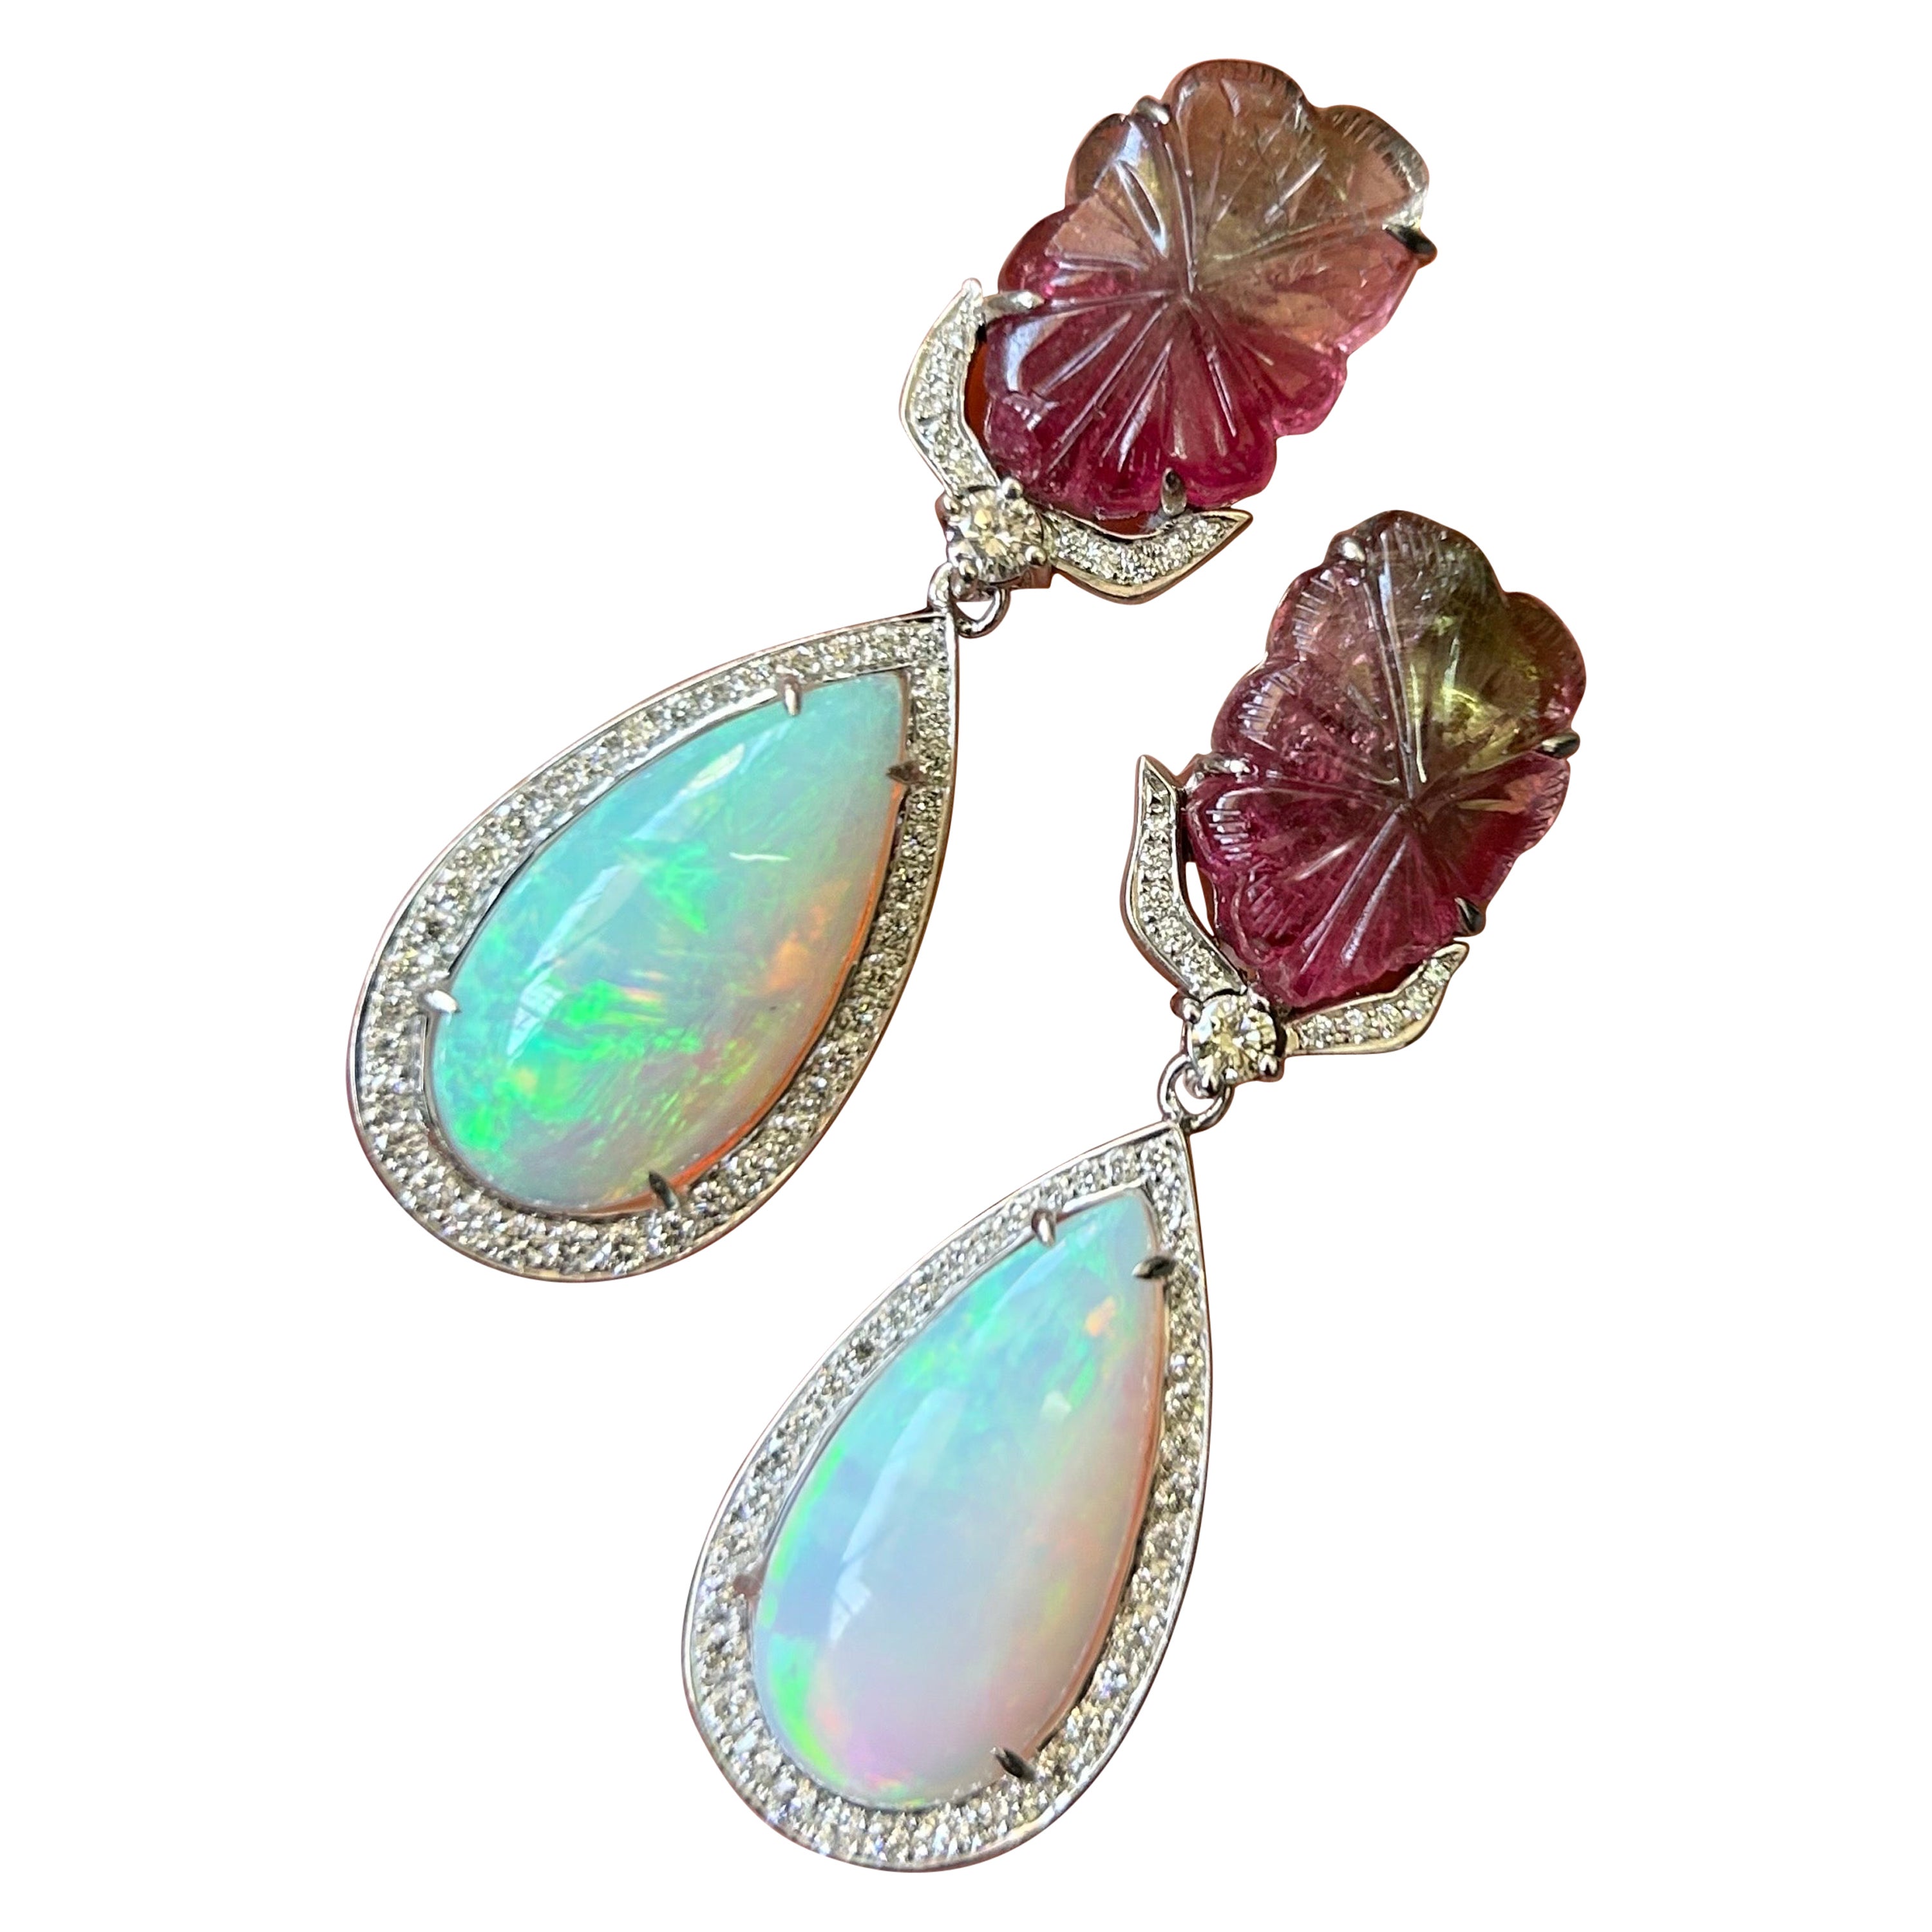 14.66 Carat Tourmaline and 16.55 Carat Opal Drops Earring For Sale